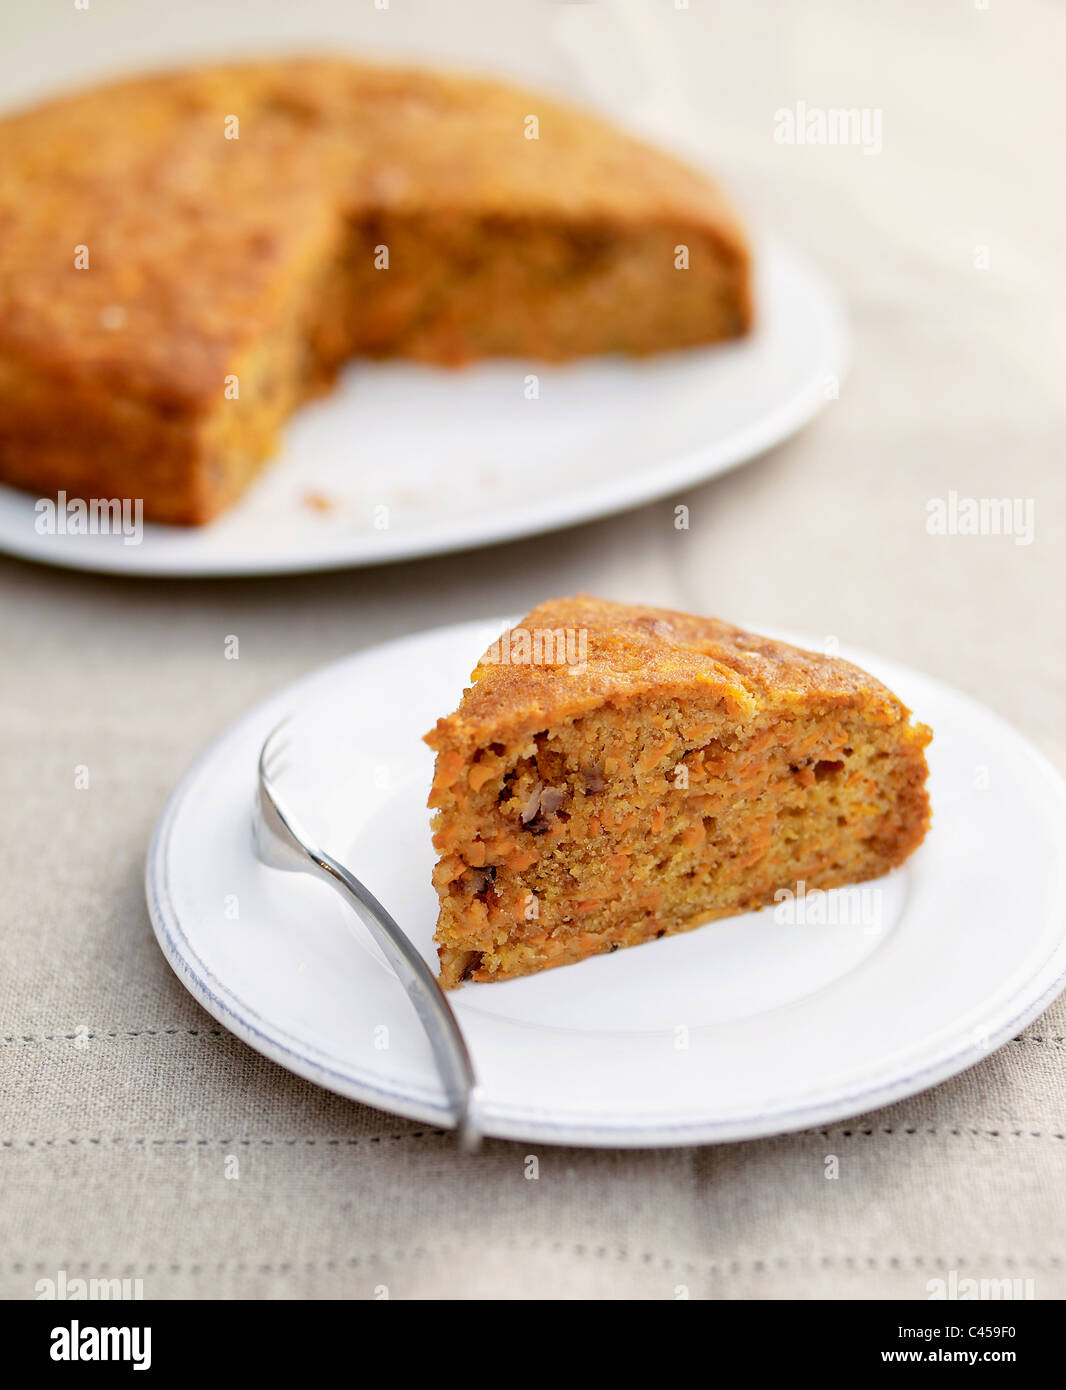 Carrot cake on plate, close-up Stock Photo